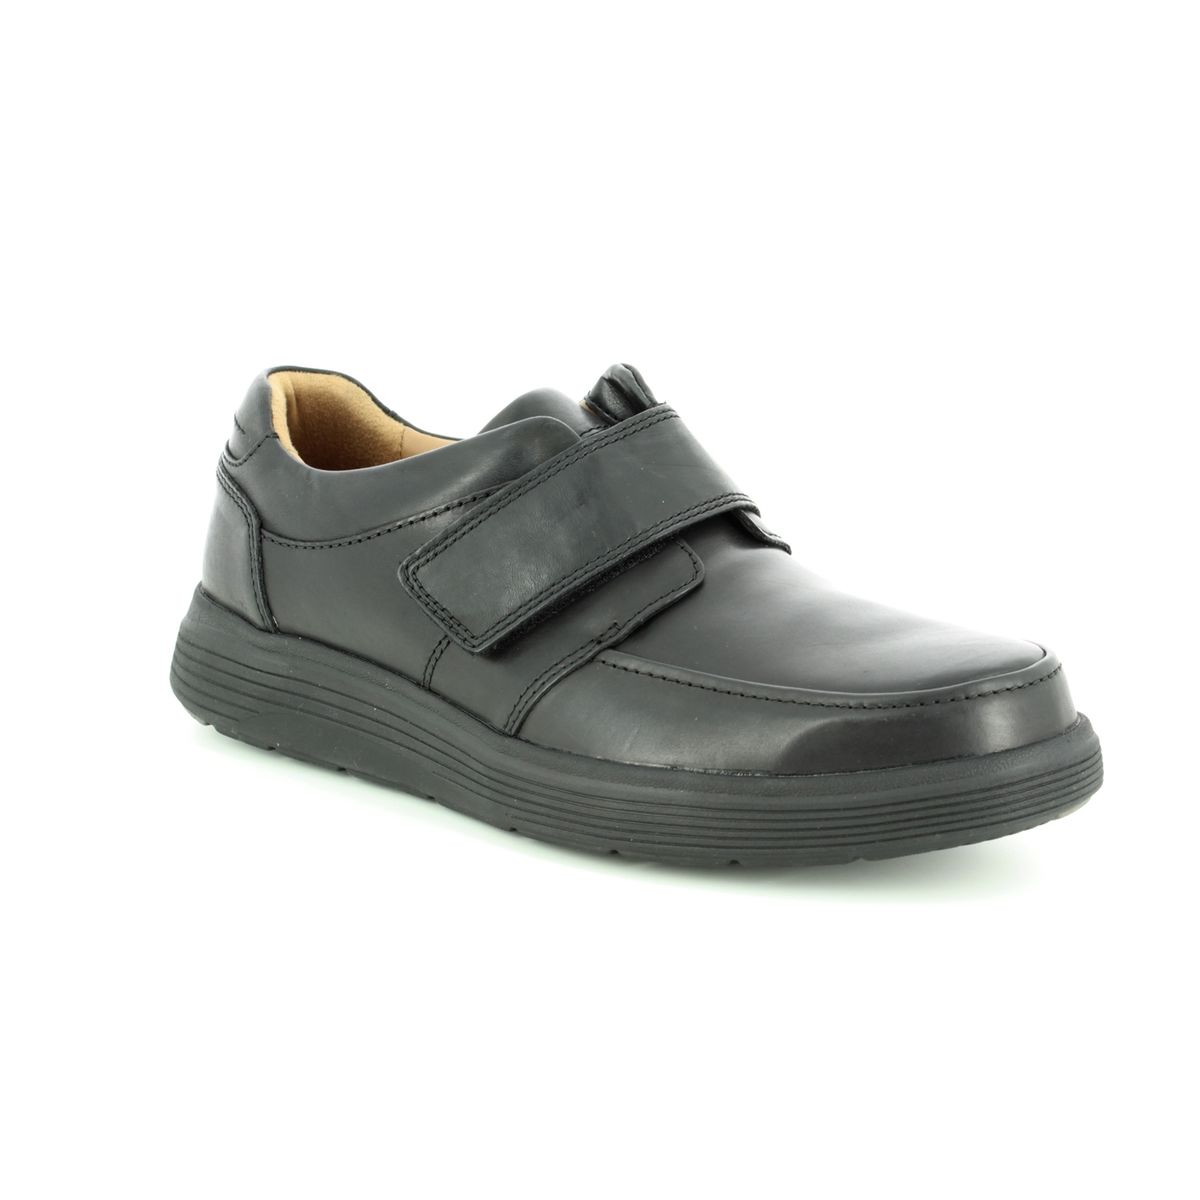 Clarks Un Abode Strap Black Leather Mens Comfort Shoes 3698-68H In Size 10 In Plain Black Leather H Width Fitting Extra Wide